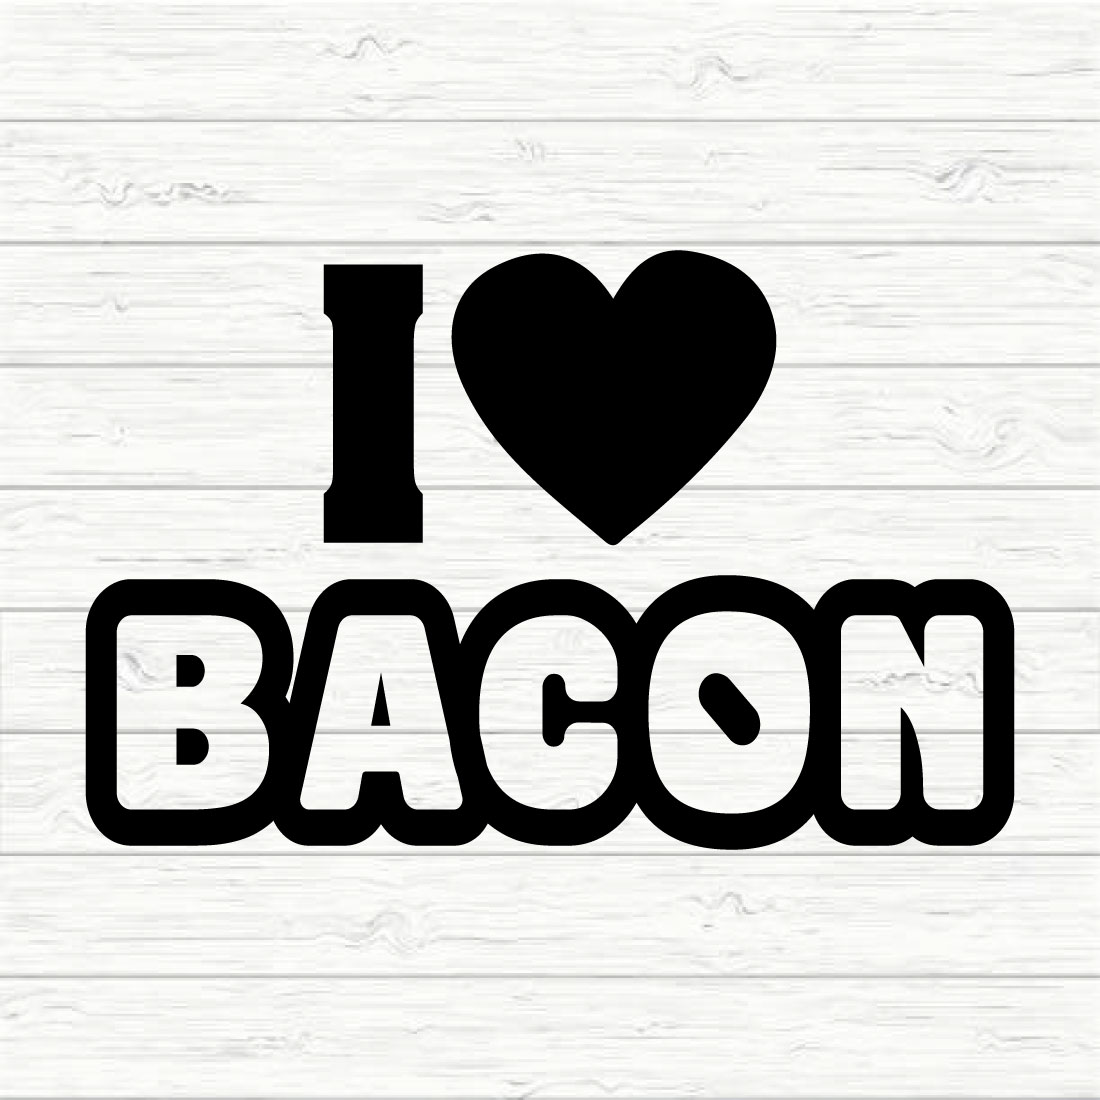 I Love Bacon preview image.